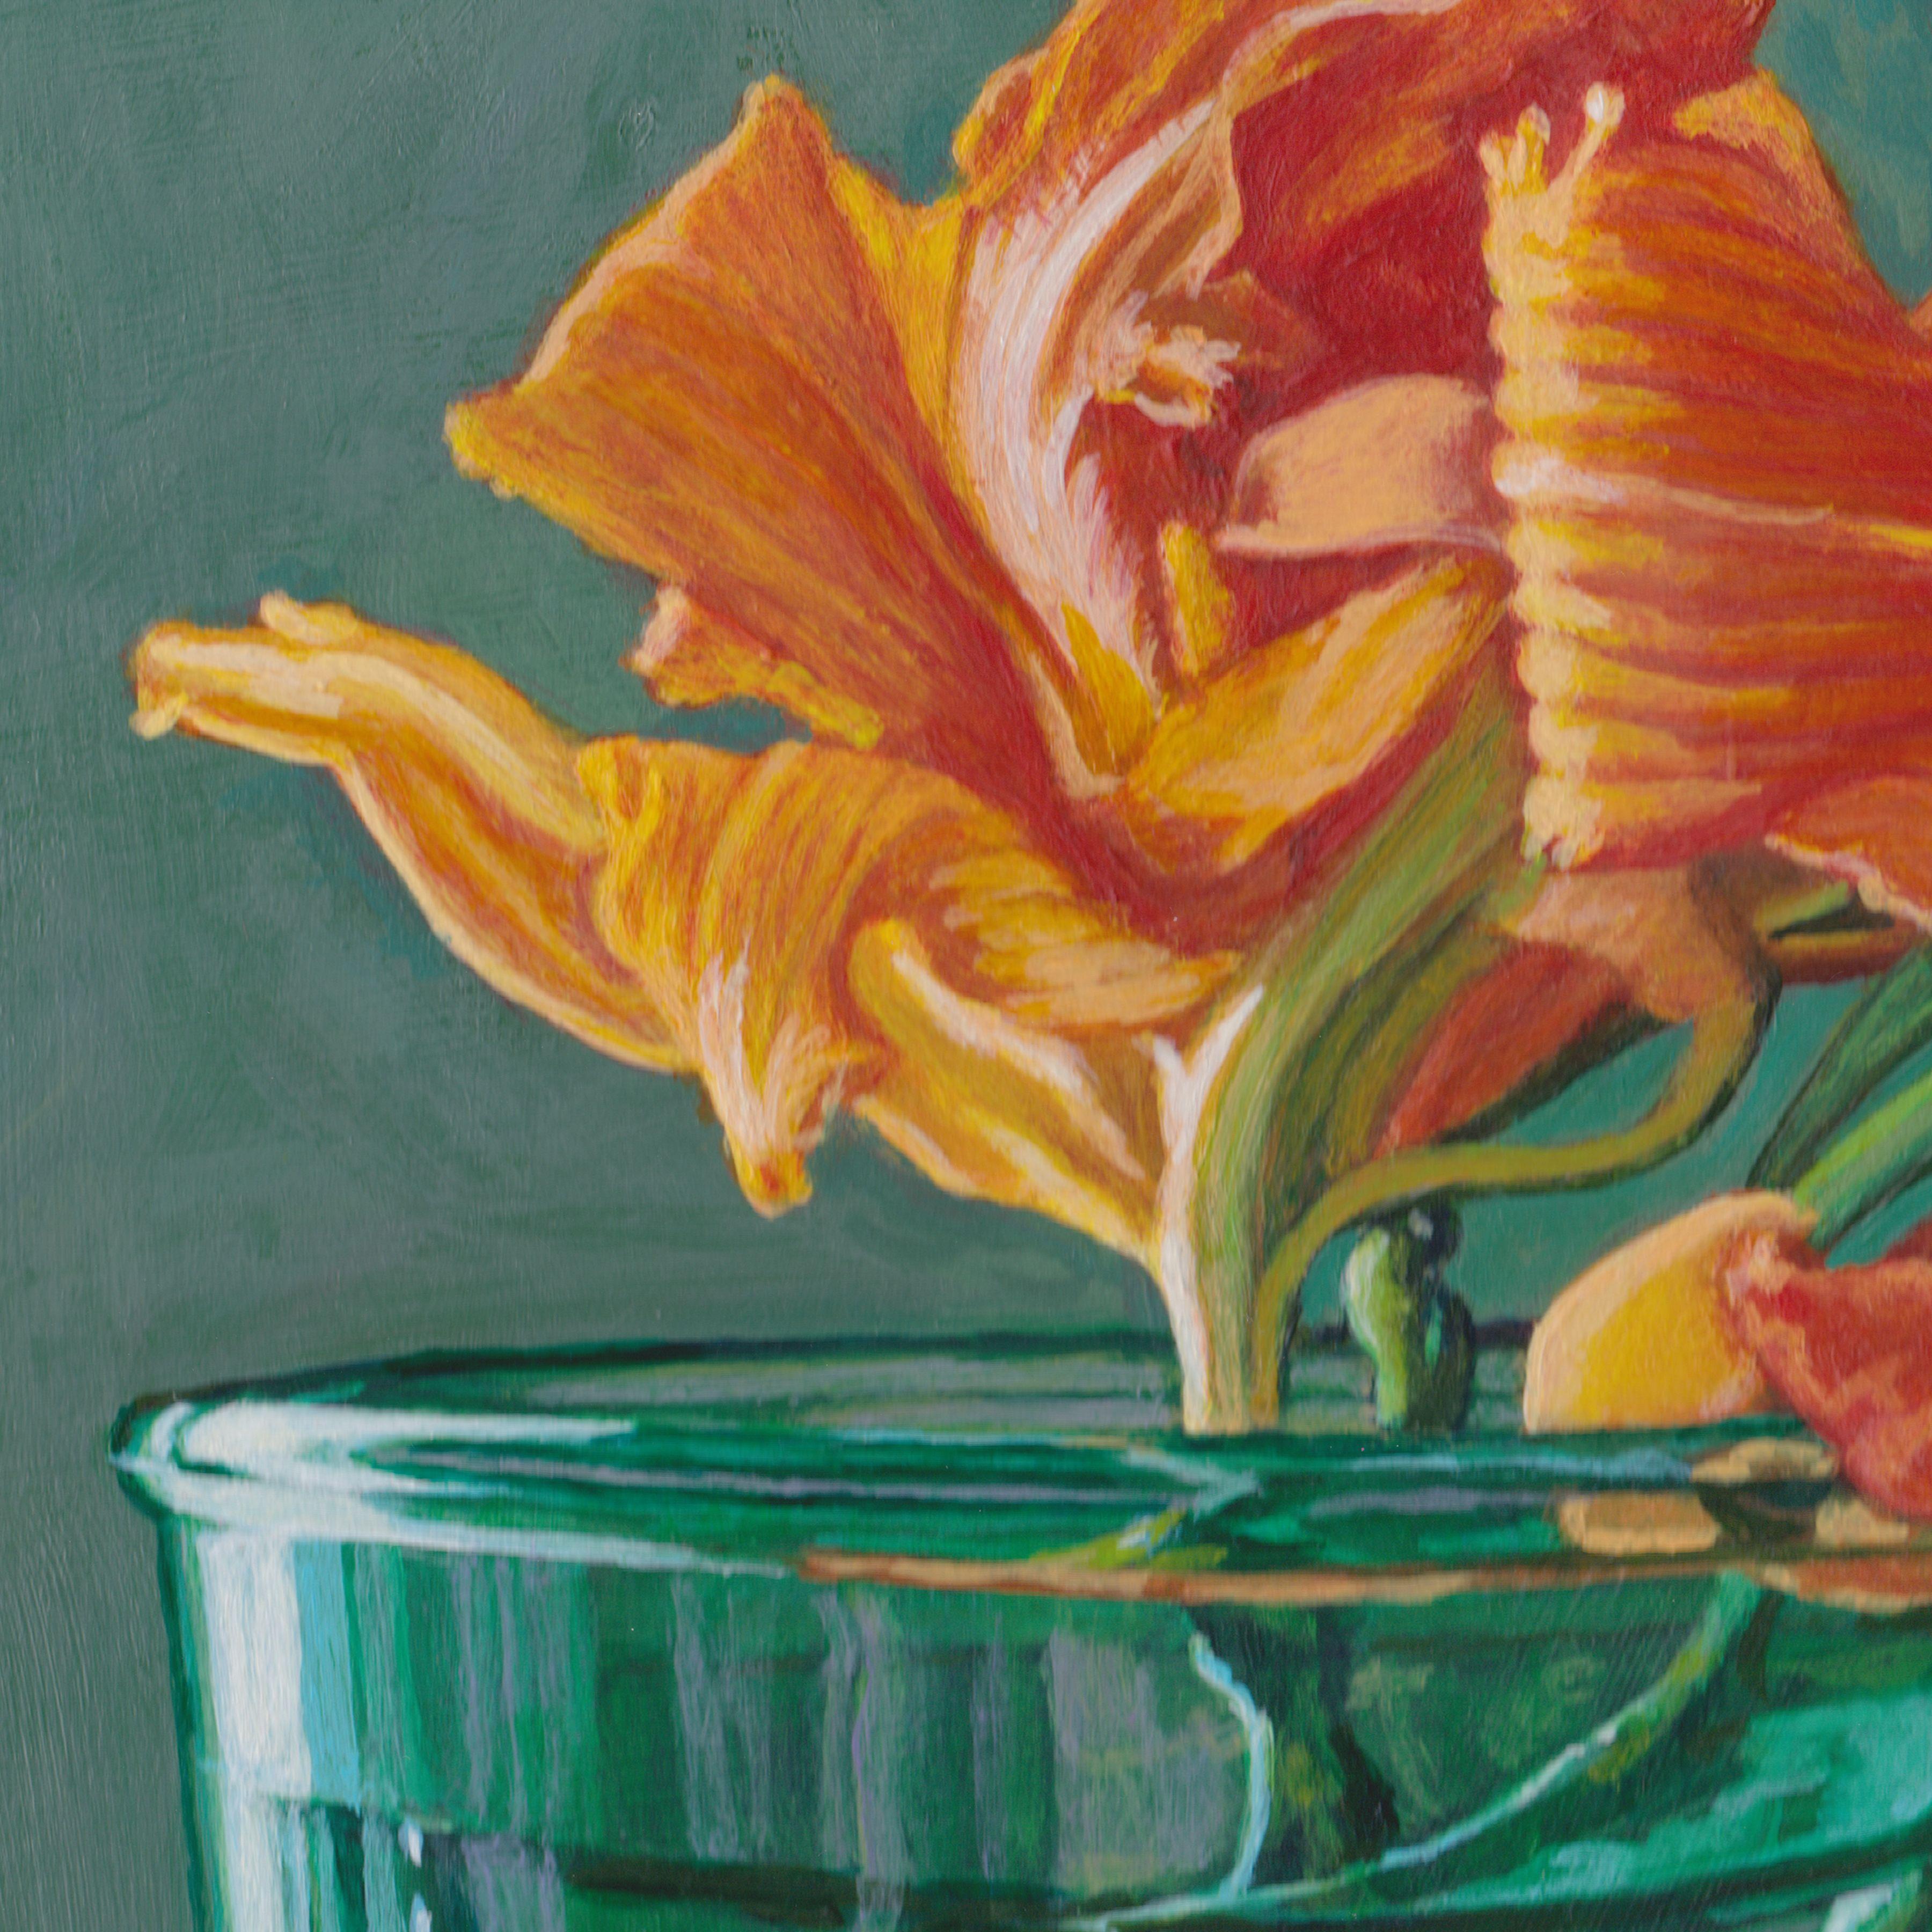 I've always had a thing for daylilies, and the transience of their beauty; here and gone in only a day. They already have a fiery glow against the greenery in the garden, so here I sought to exaggerate that fire by contrasting the blooms against the